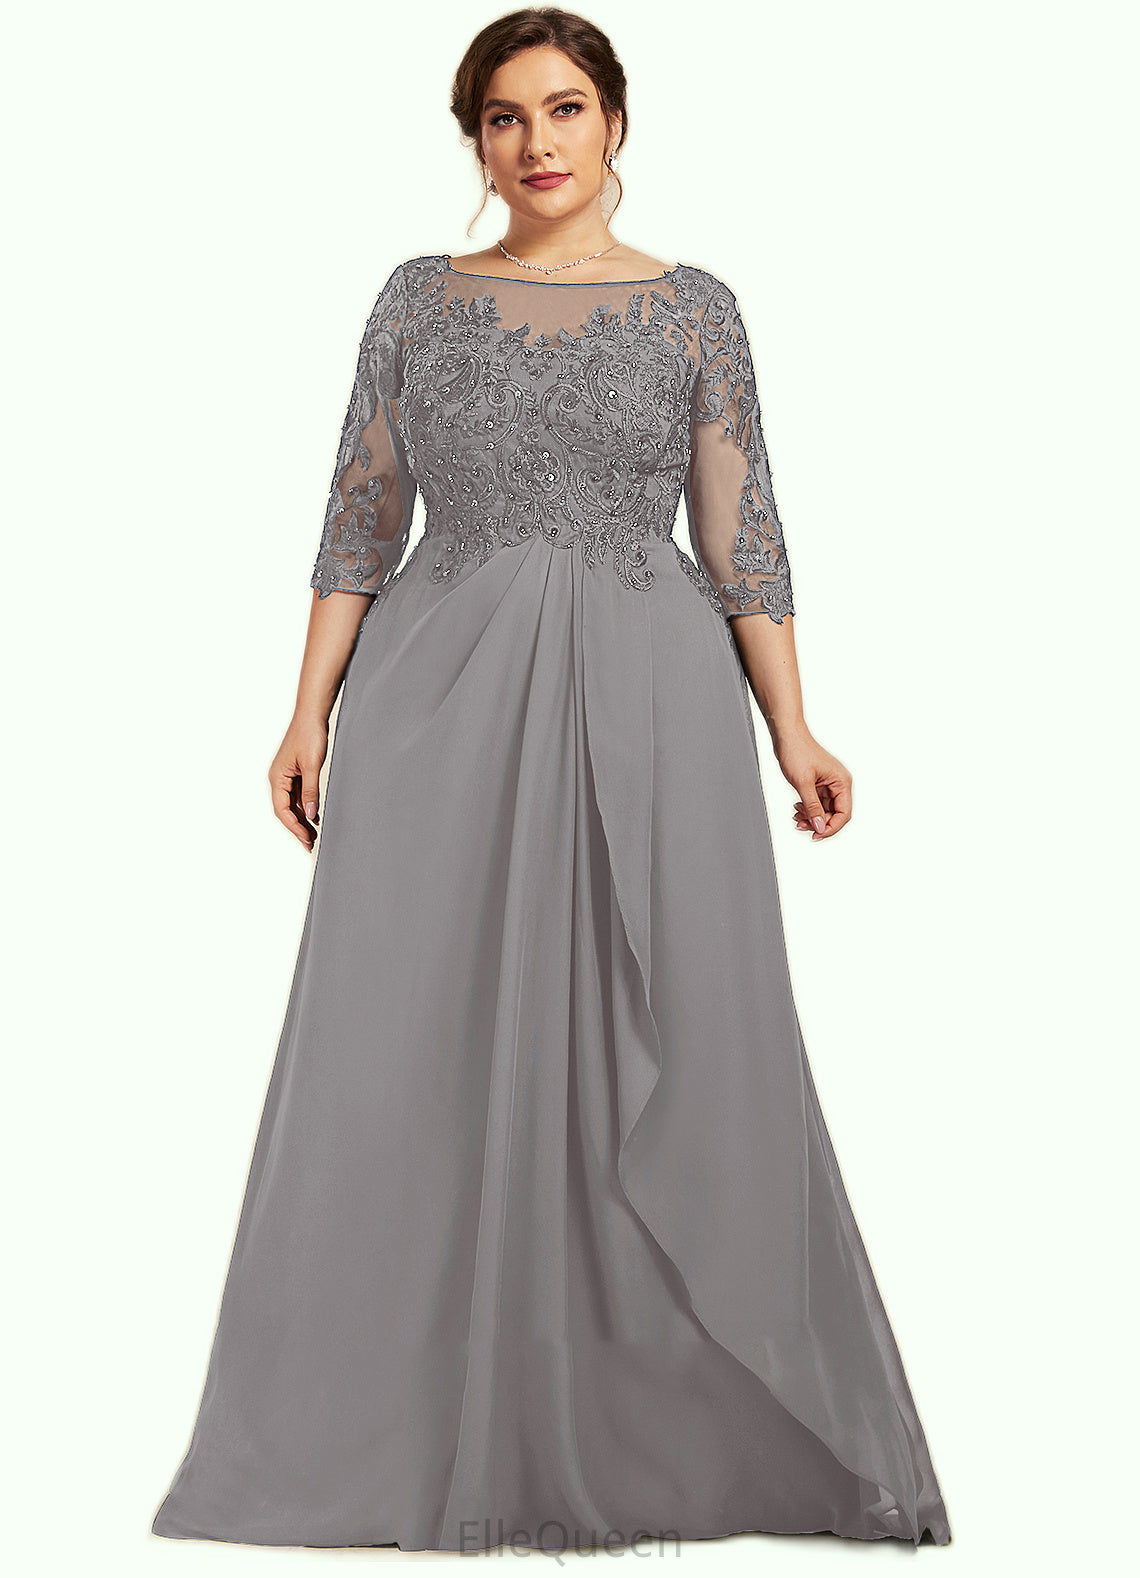 Gwendoline A-Line Scoop Neck Floor-Length Chiffon Lace Mother of the Bride Dress With Beading Sequins Cascading Ruffles DG126P0014529